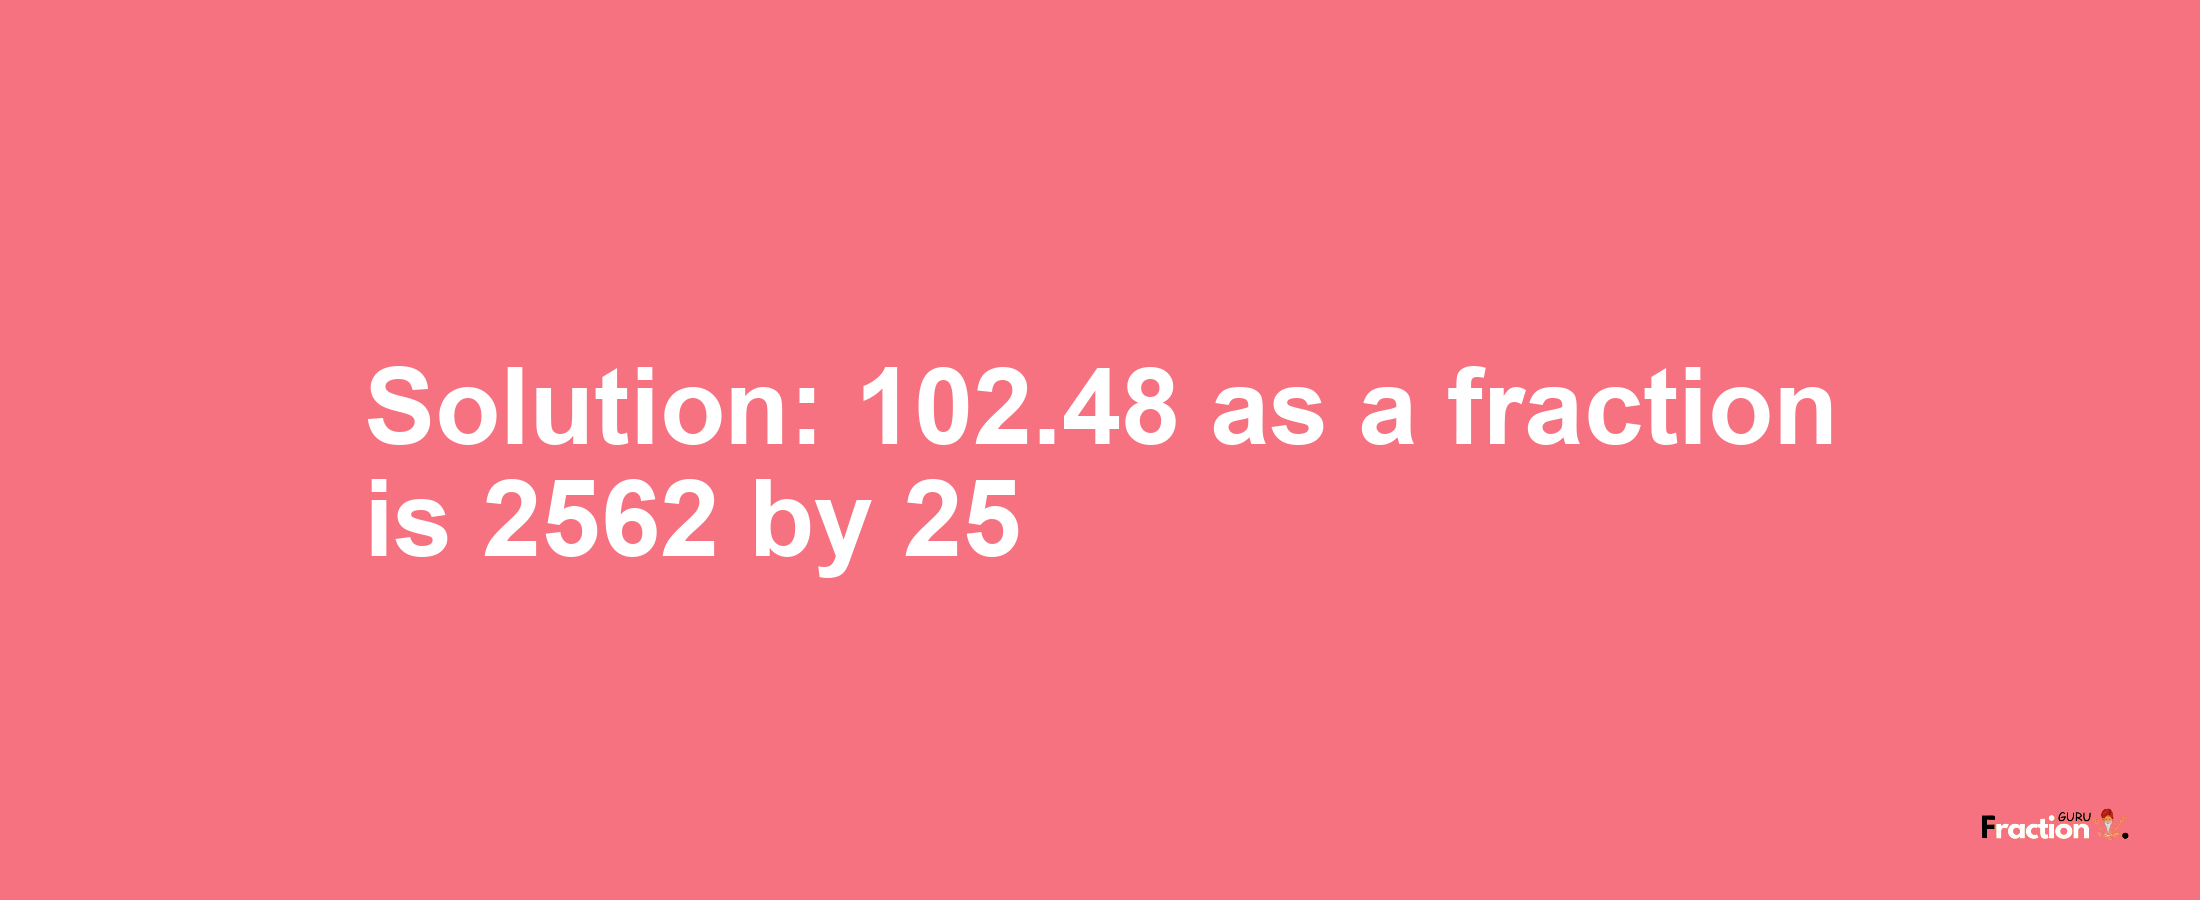 Solution:102.48 as a fraction is 2562/25